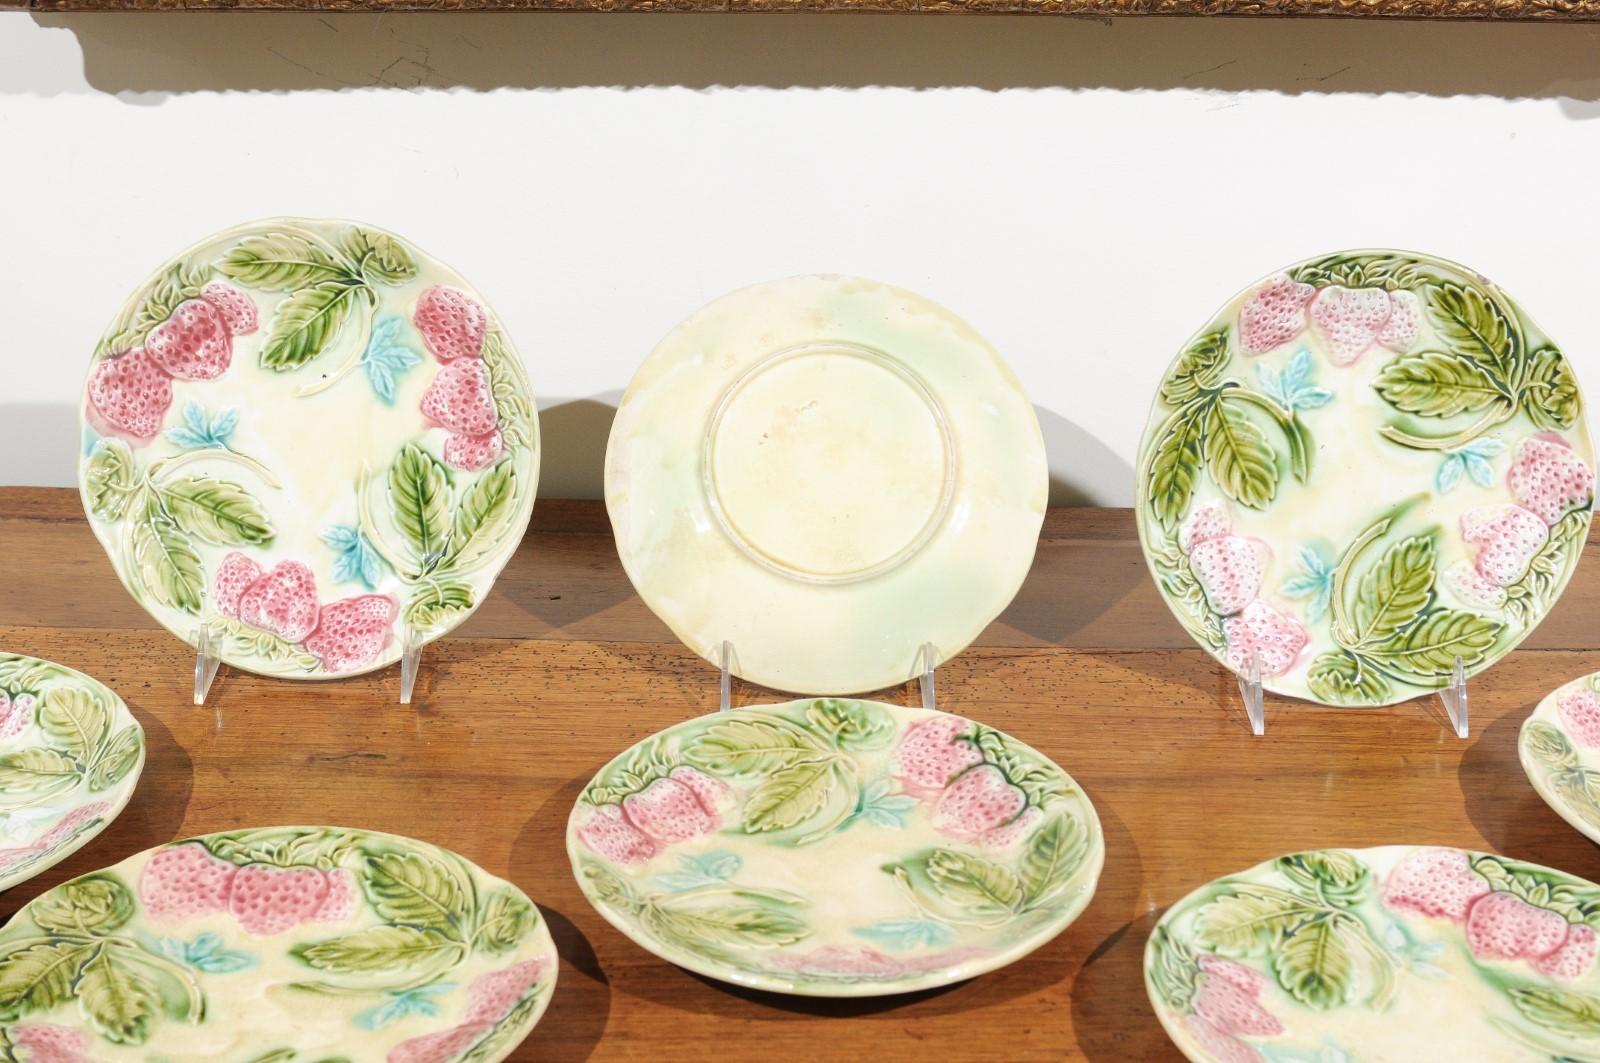 French 19th Century Majolica Plates with Raised Decor of Strawberries and Leaves For Sale 6